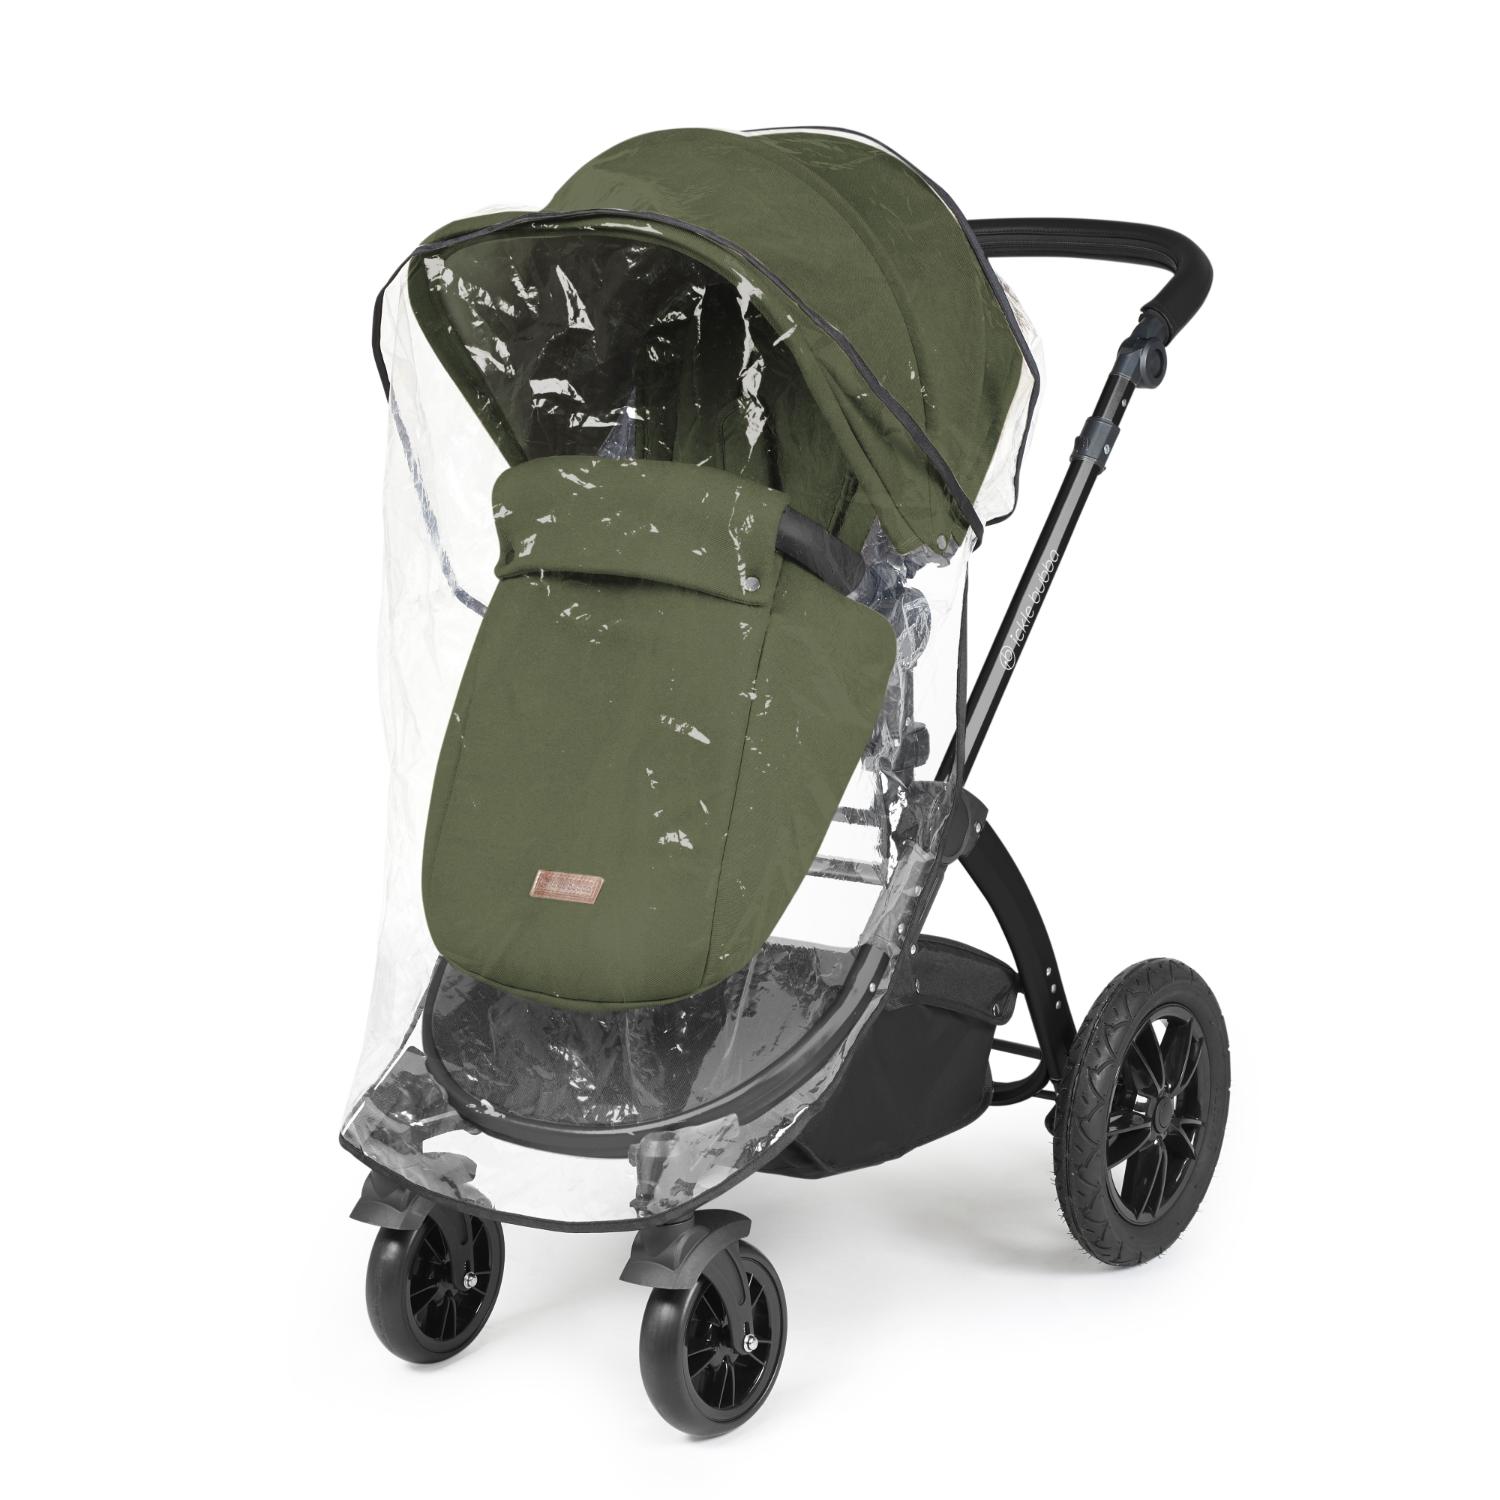 Rain cover placed on an Ickle Bubba Stomp Luxe Pushchair in Woodland green colour with bronze chassis and tan handle